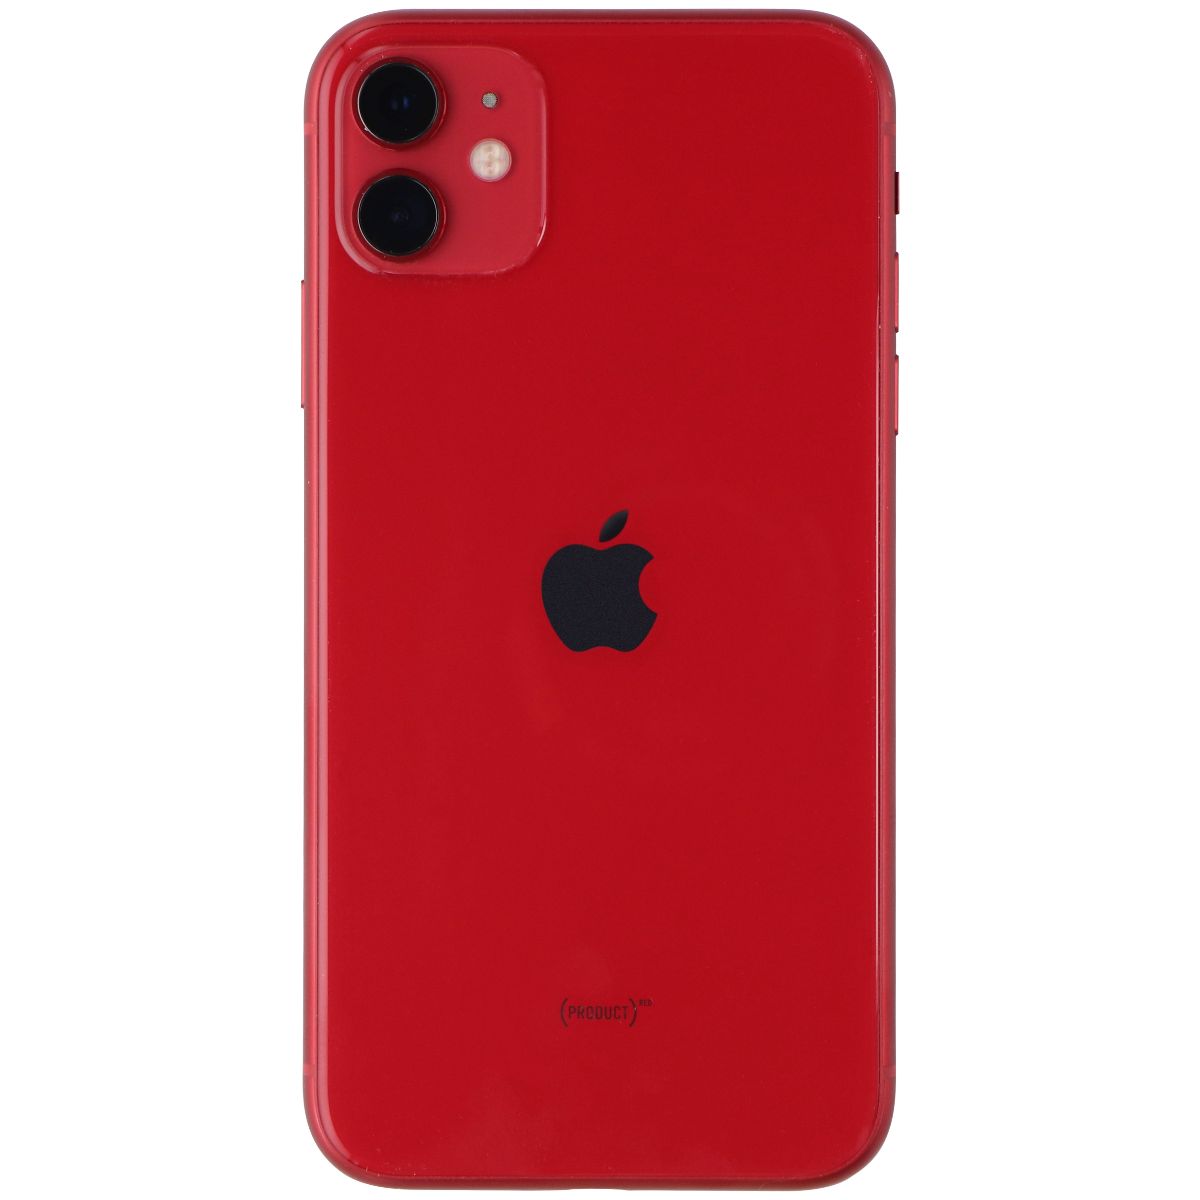 Apple iPhone 11 (6.1-inch) Smartphone (A2111) Dish Boost ONLY - 64GB / Red Cell Phones & Smartphones Apple    - Simple Cell Bulk Wholesale Pricing - USA Seller